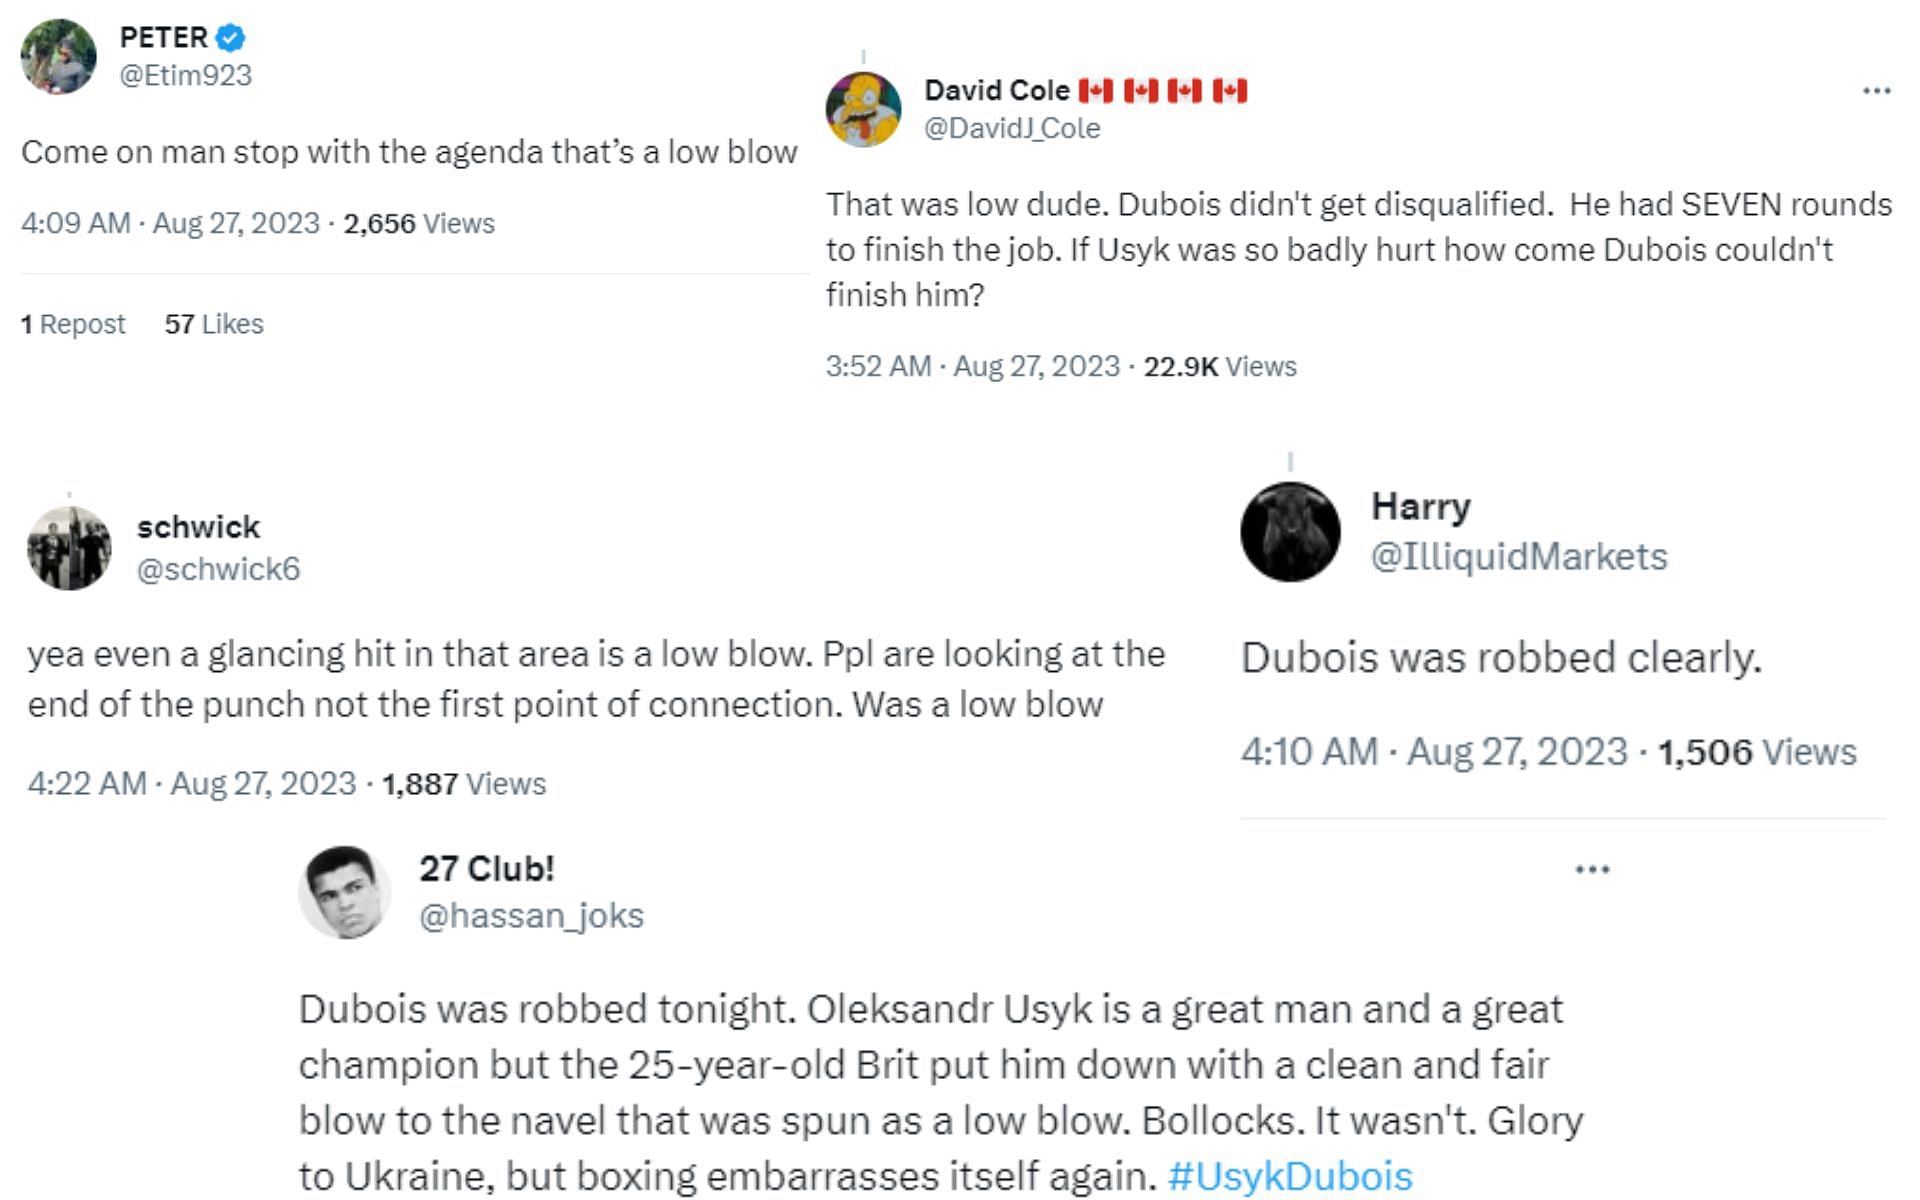 Fans react to the low blow controversy in the Oleksandr Usyk vs. Daniel Dubois fight